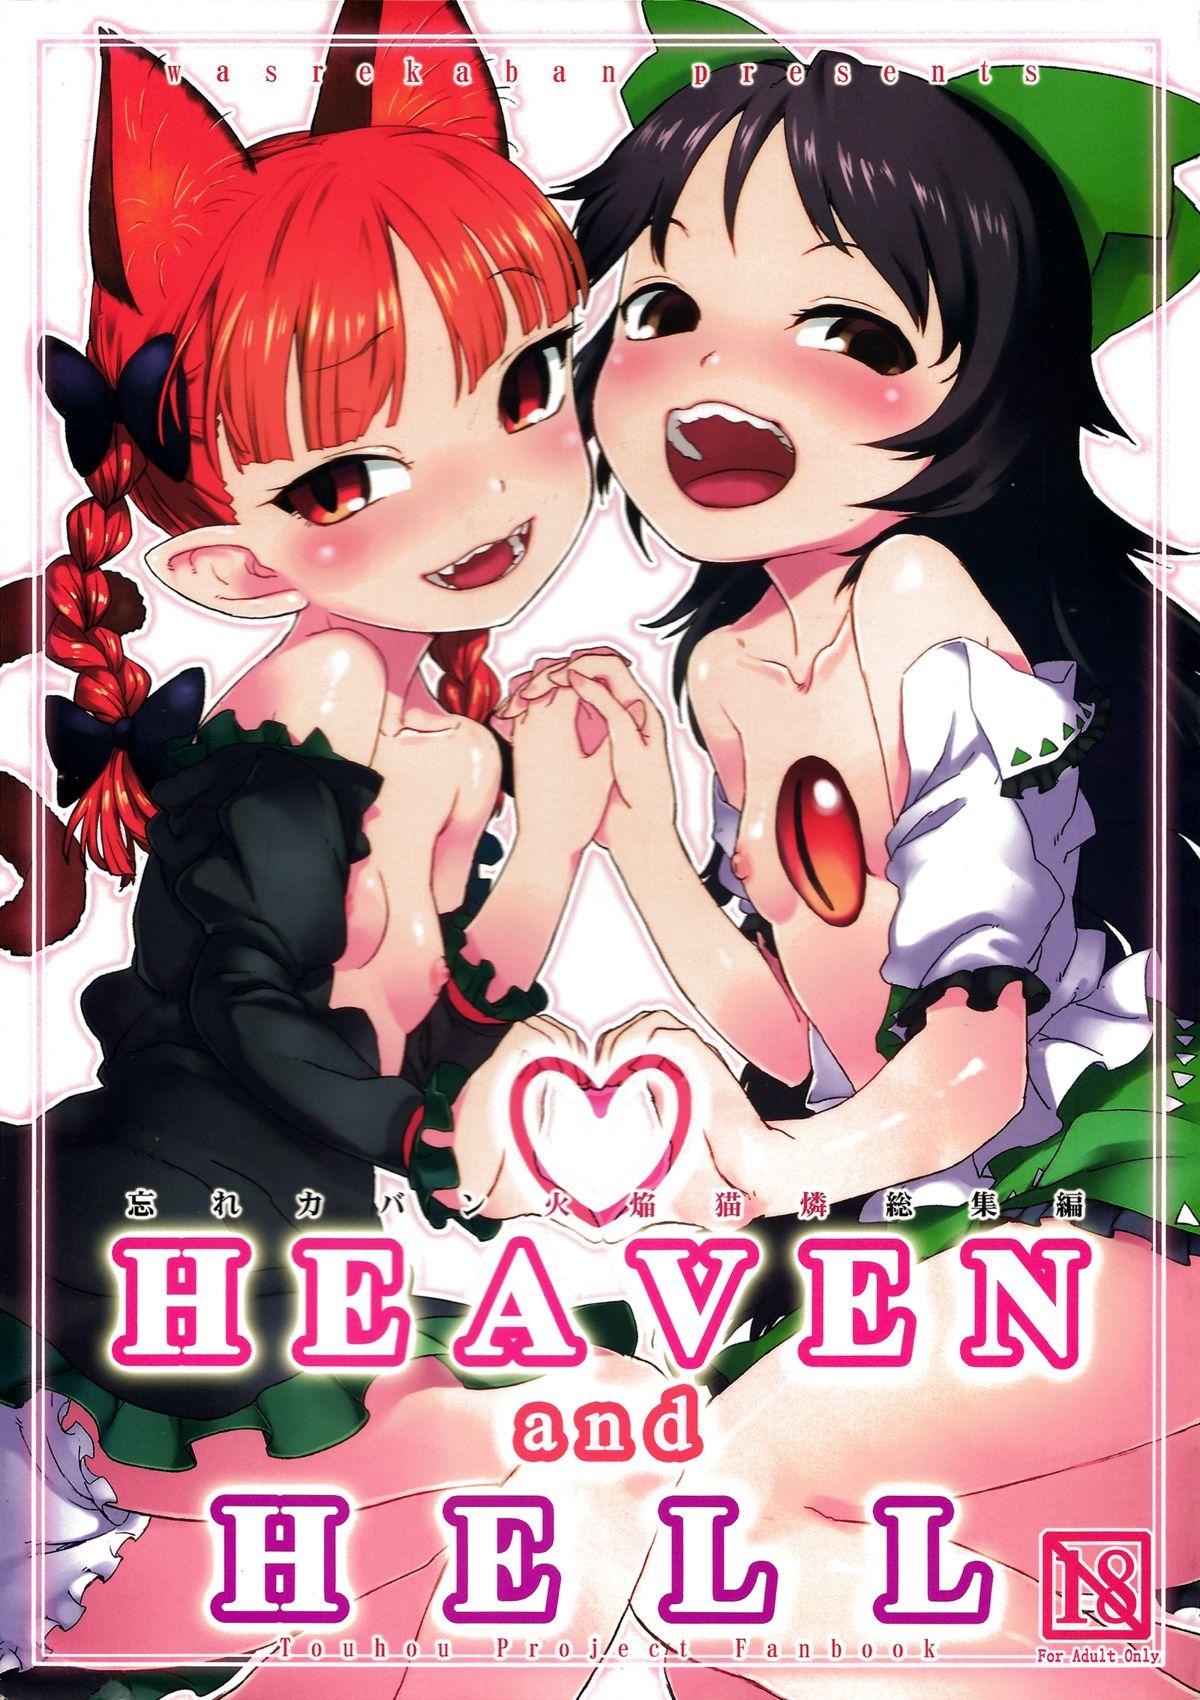 Titty Fuck HEAVEN and HELL - Touhou project Hardcore Sex - Page 1